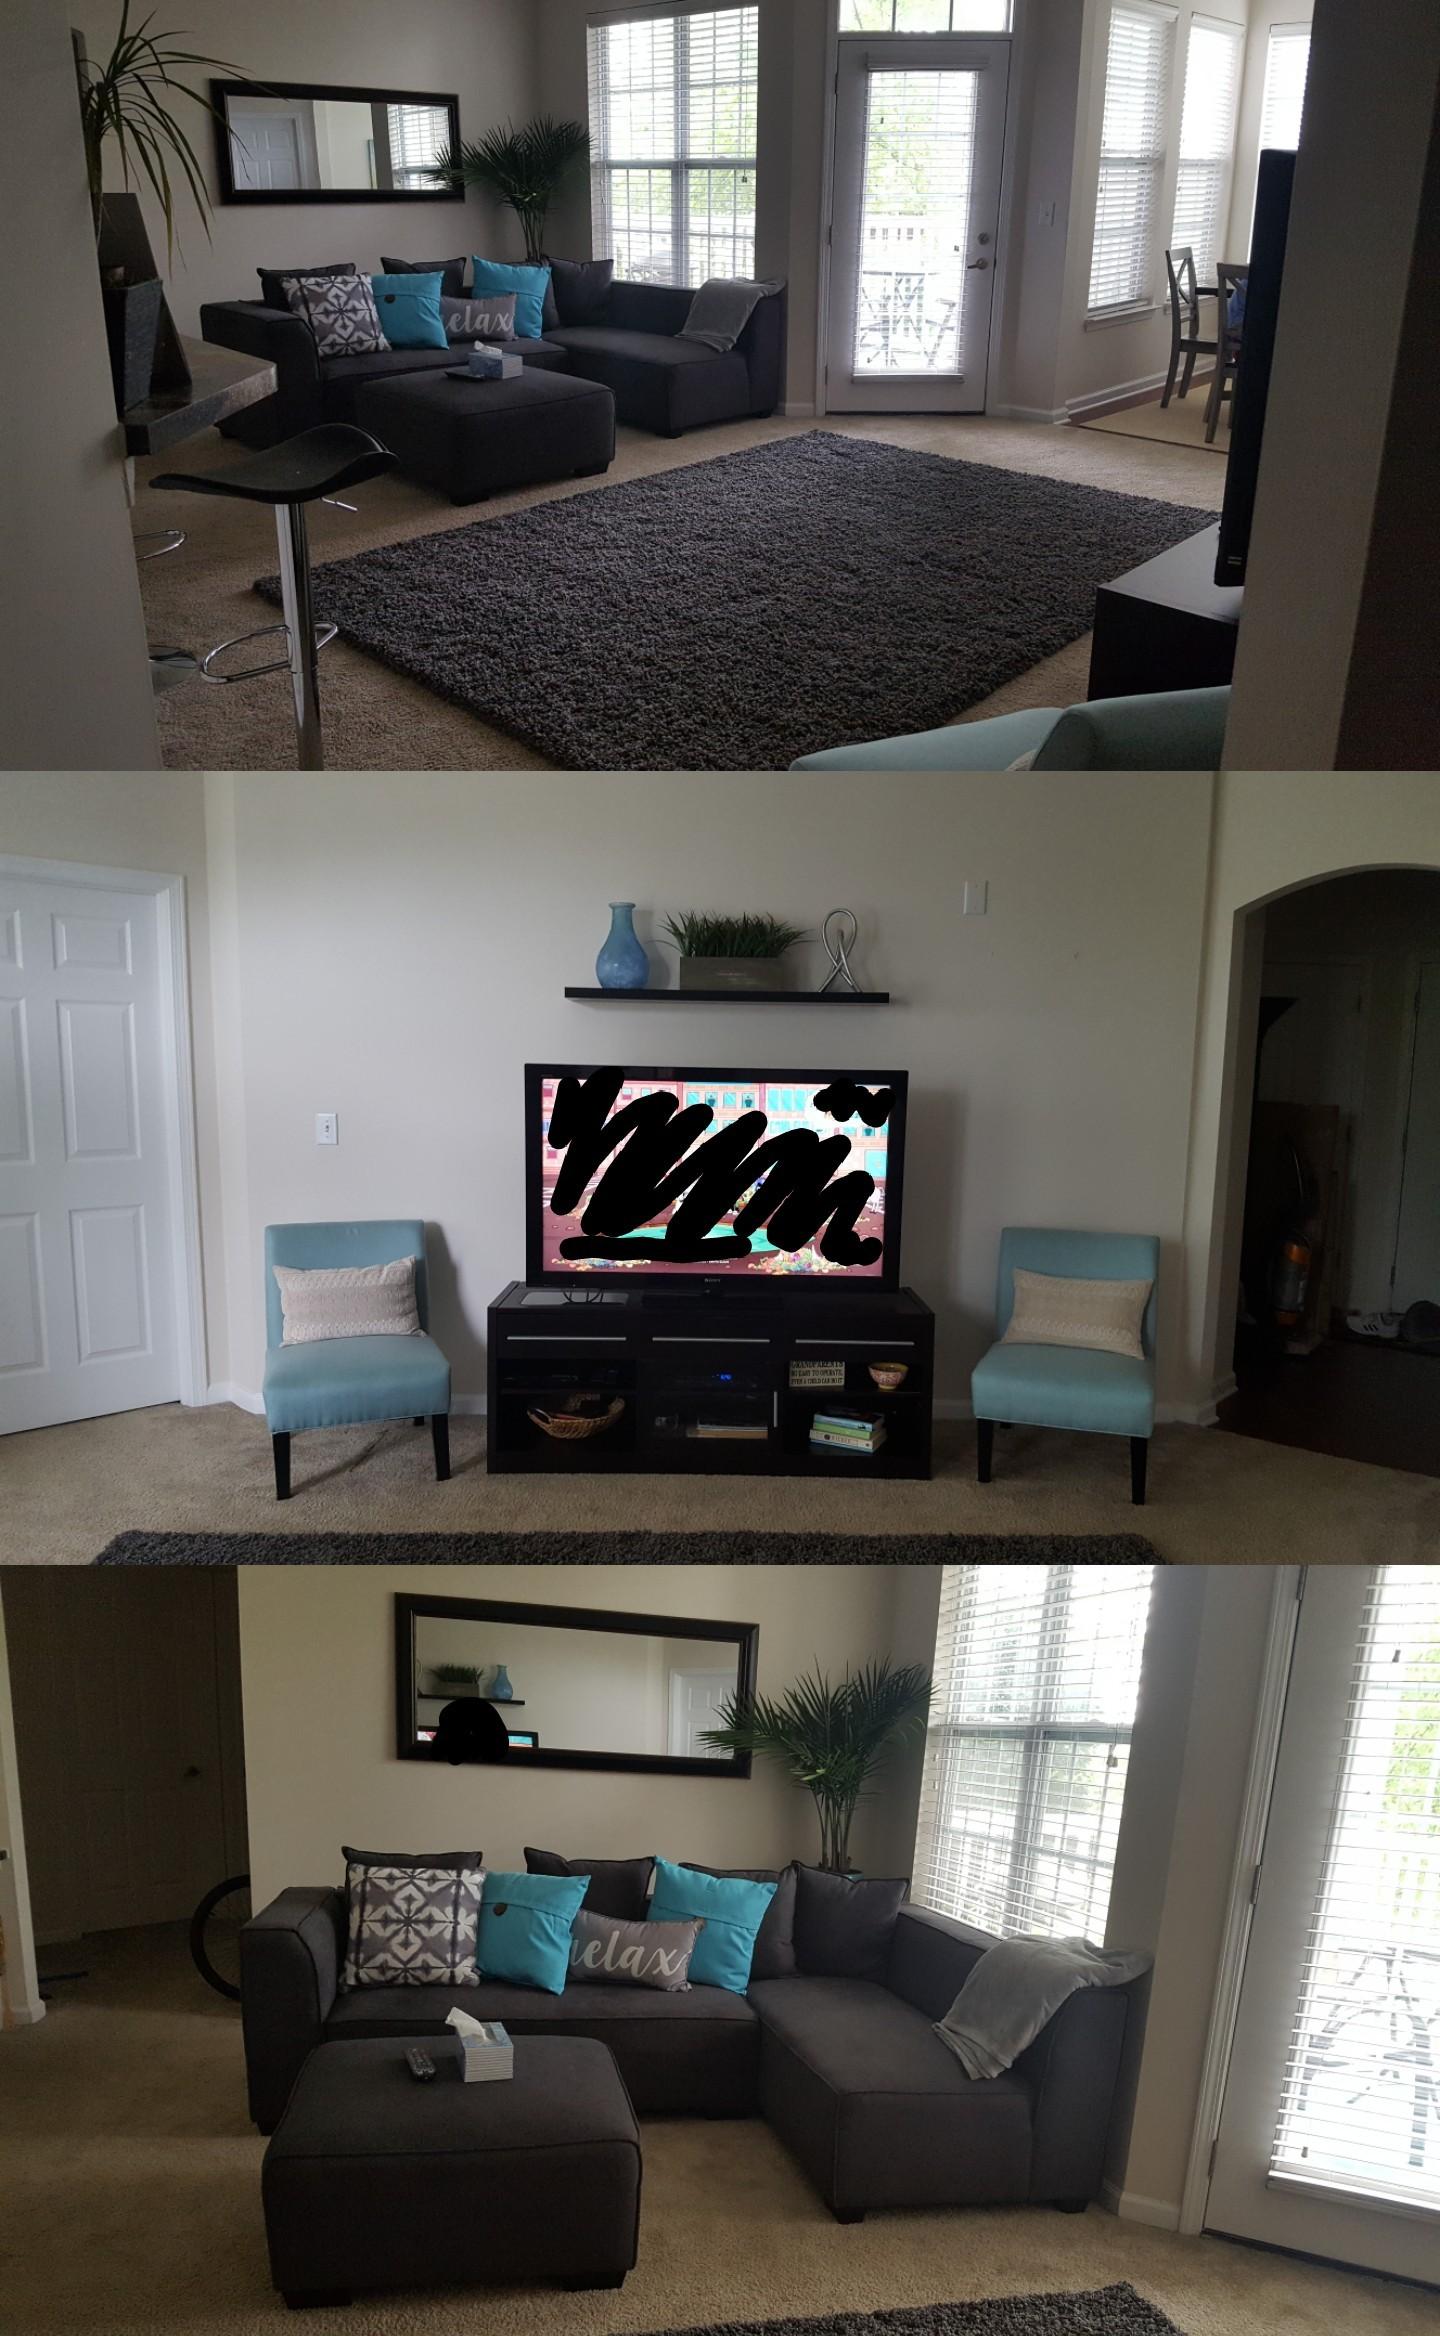 This is our new living room!!! I love it soo much.